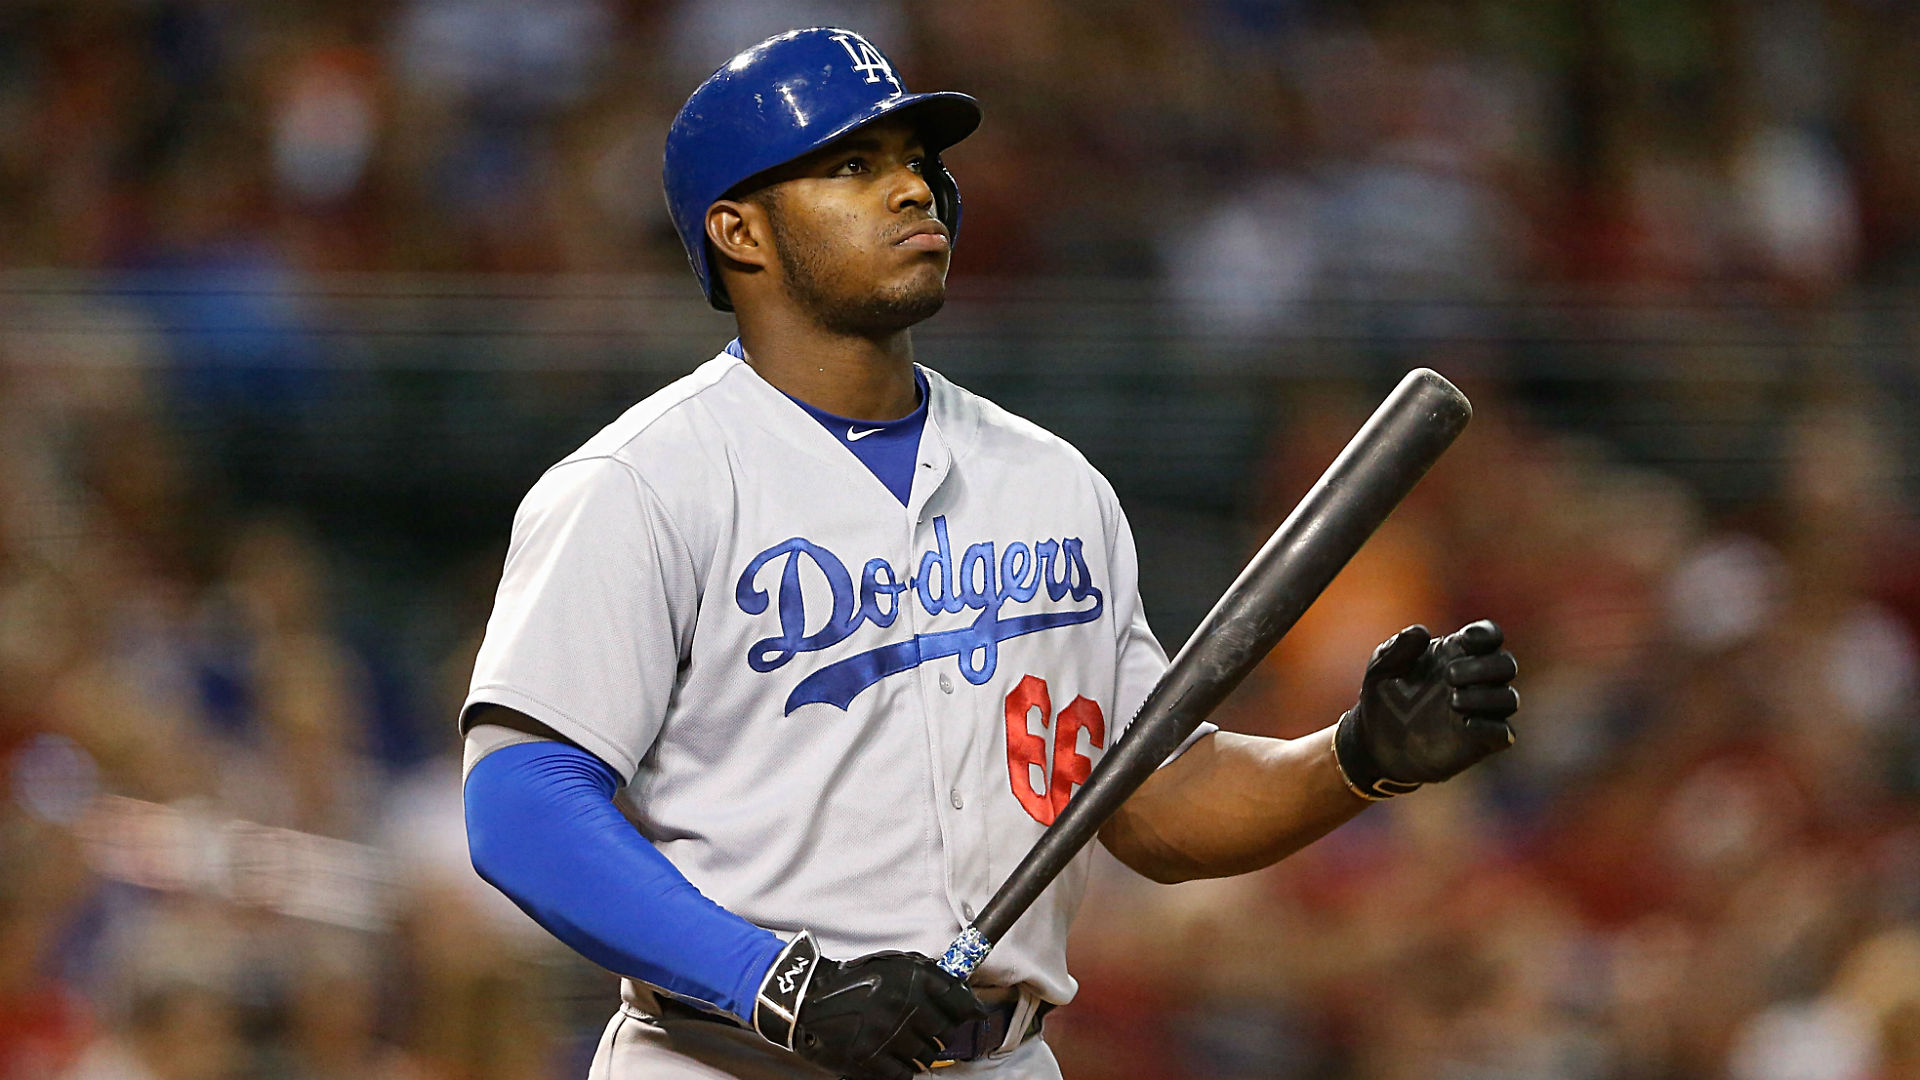 SOURCE SPORTS: MLB Star Yasiel Puig Sued For Sexual Battery At Lakers Game